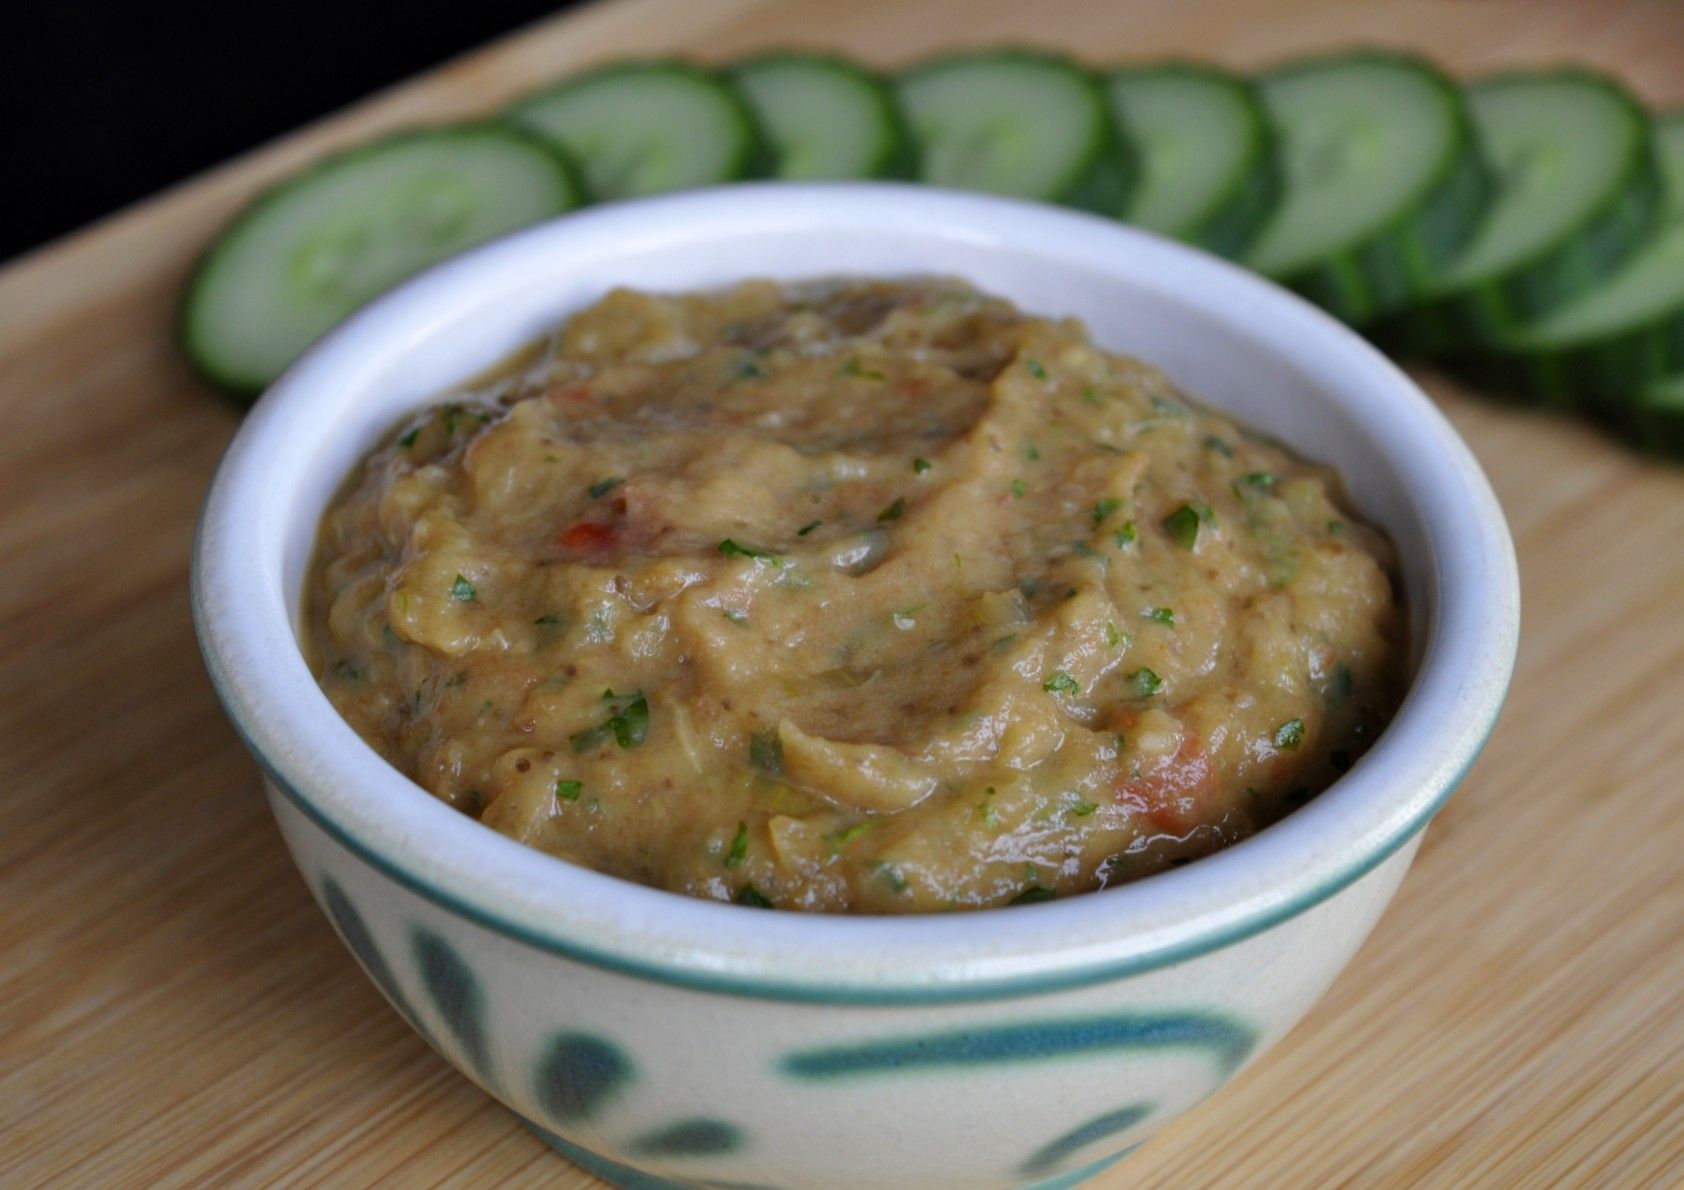 Roasted Eggplant and Caramelized Onion Dip